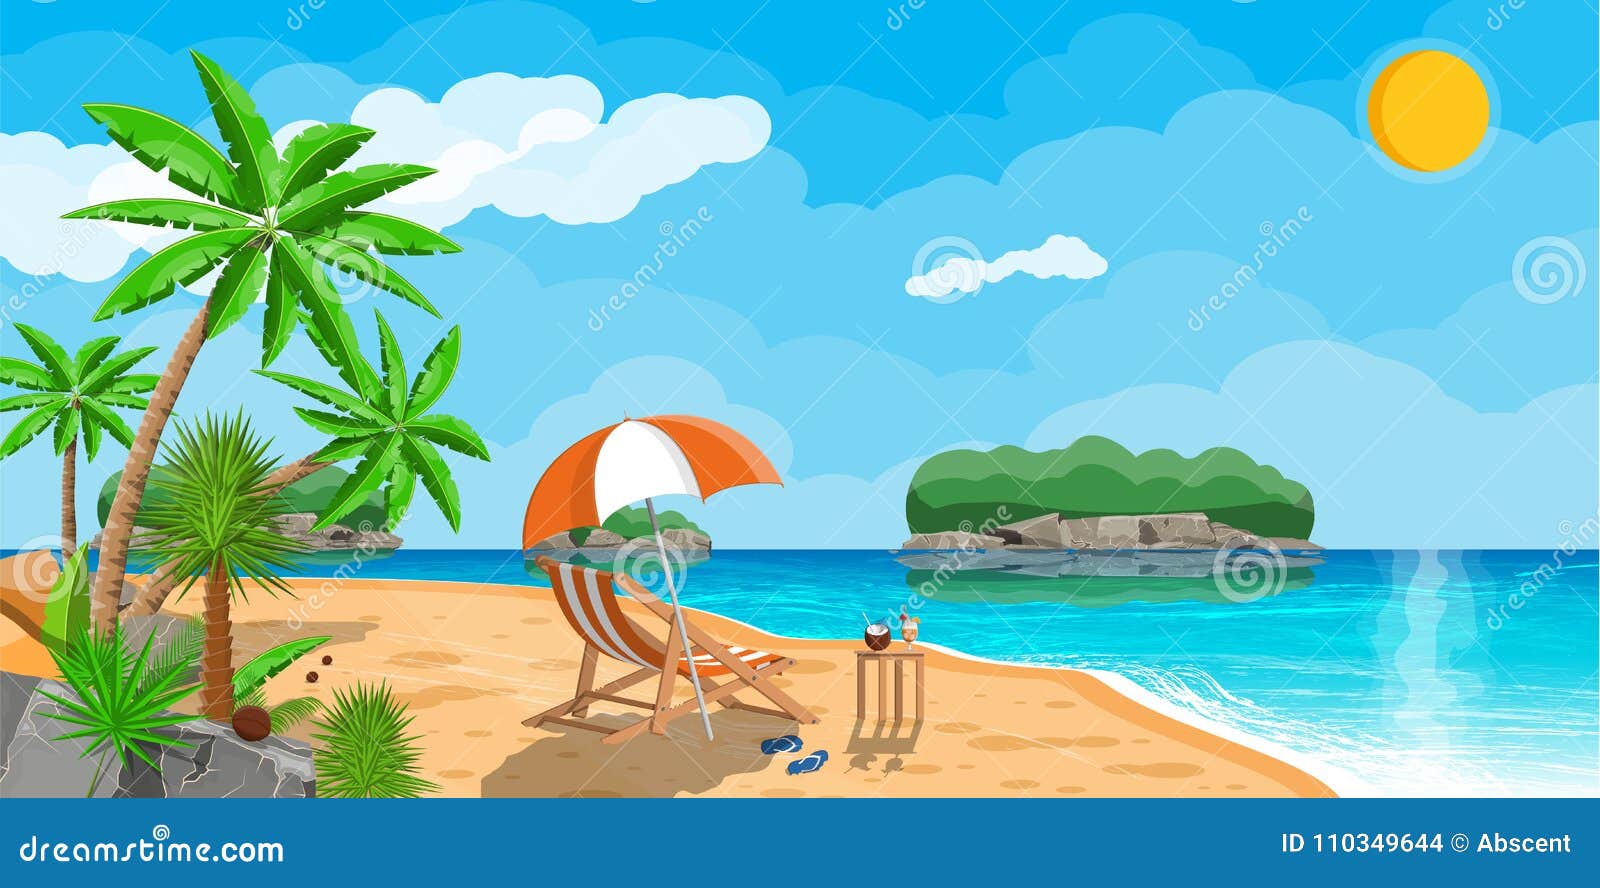 Landscape Of Palm Tree On Beach Stock Vector - Illustration of nature ...